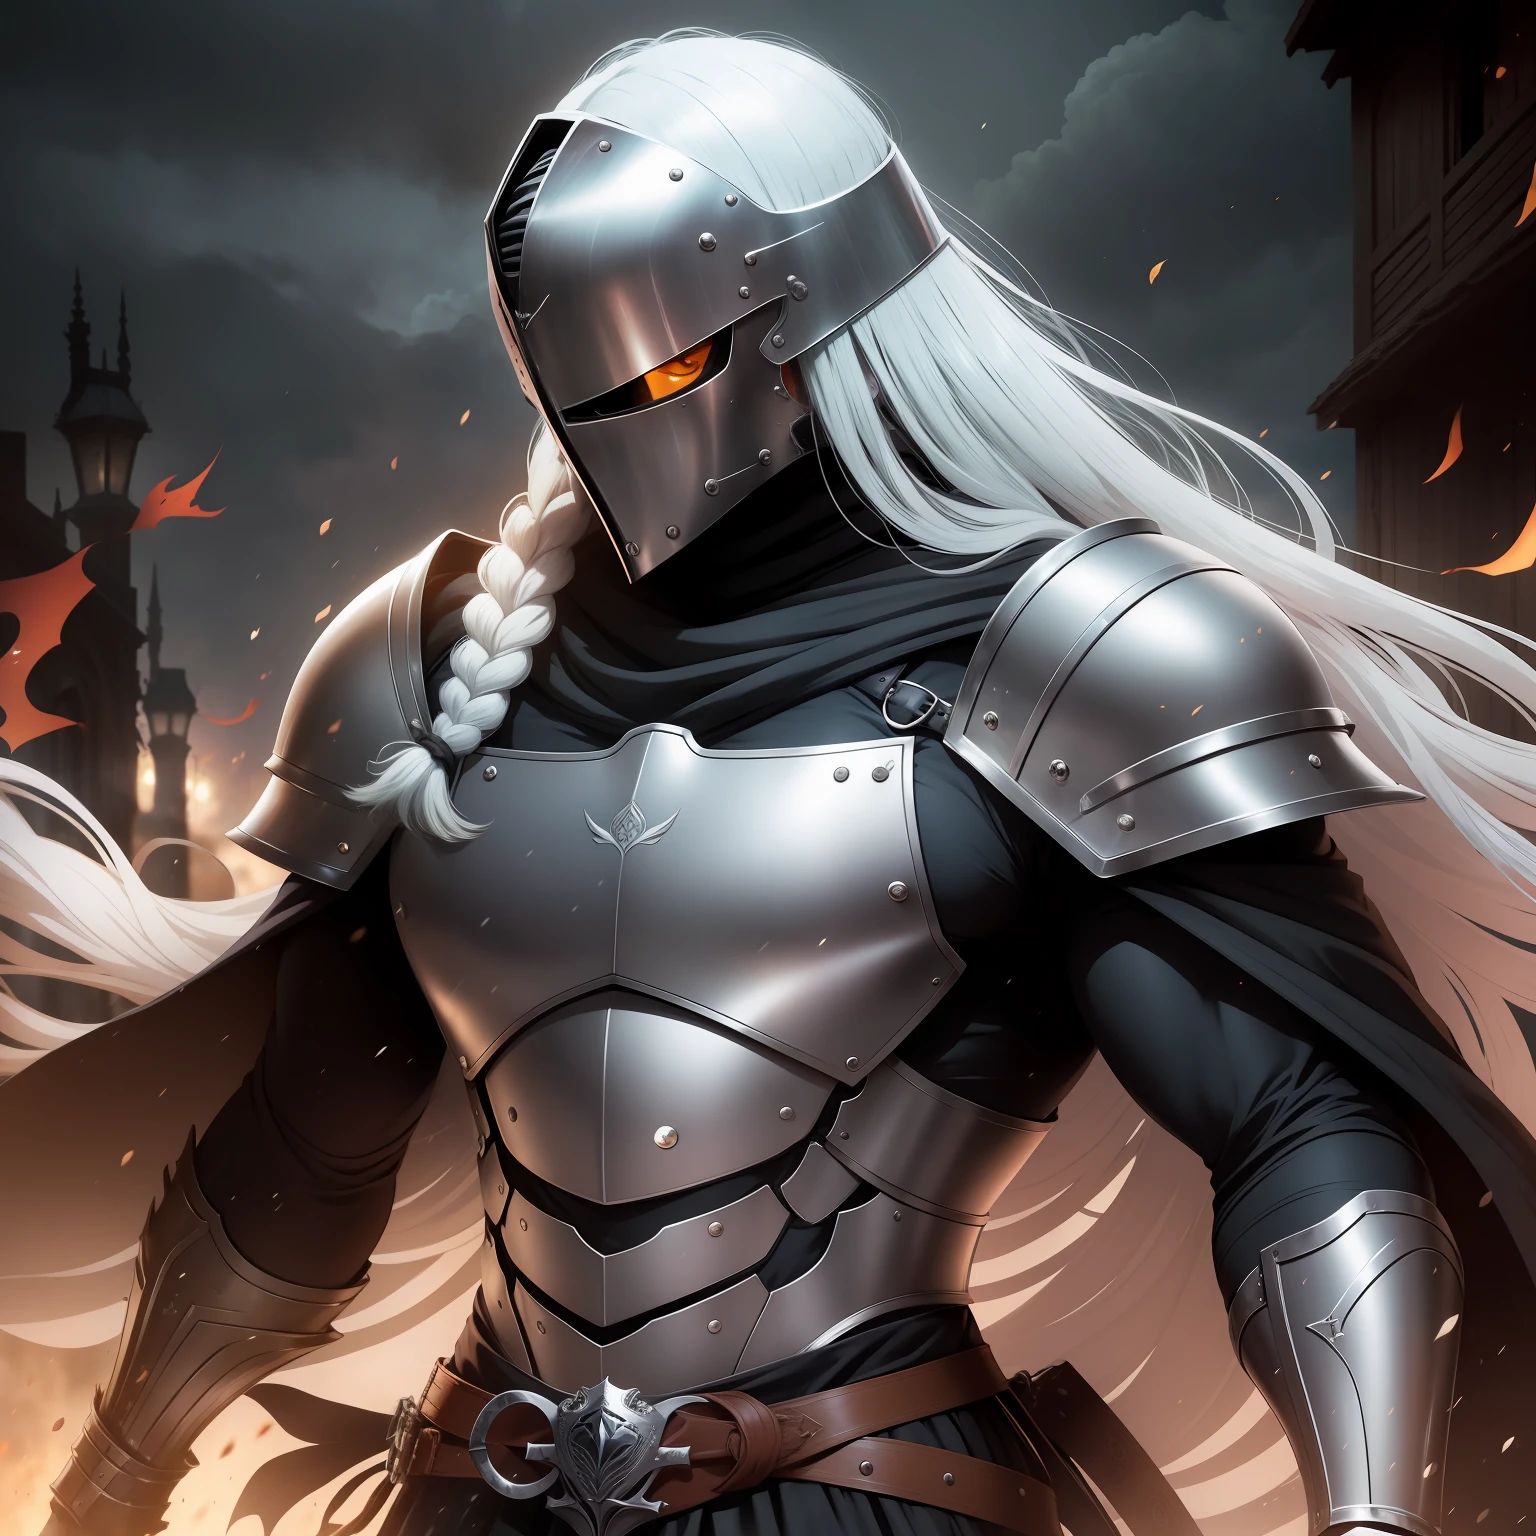 gloomy setting,アニメ,knightgirl, ((masculine)),Dullahan, lost head,souls coming out of your neck, medieval armor, Head with helmet,long sword on your back,1Homen,long hair in a long braid,gray hair,bright purple eyes,ambient light.